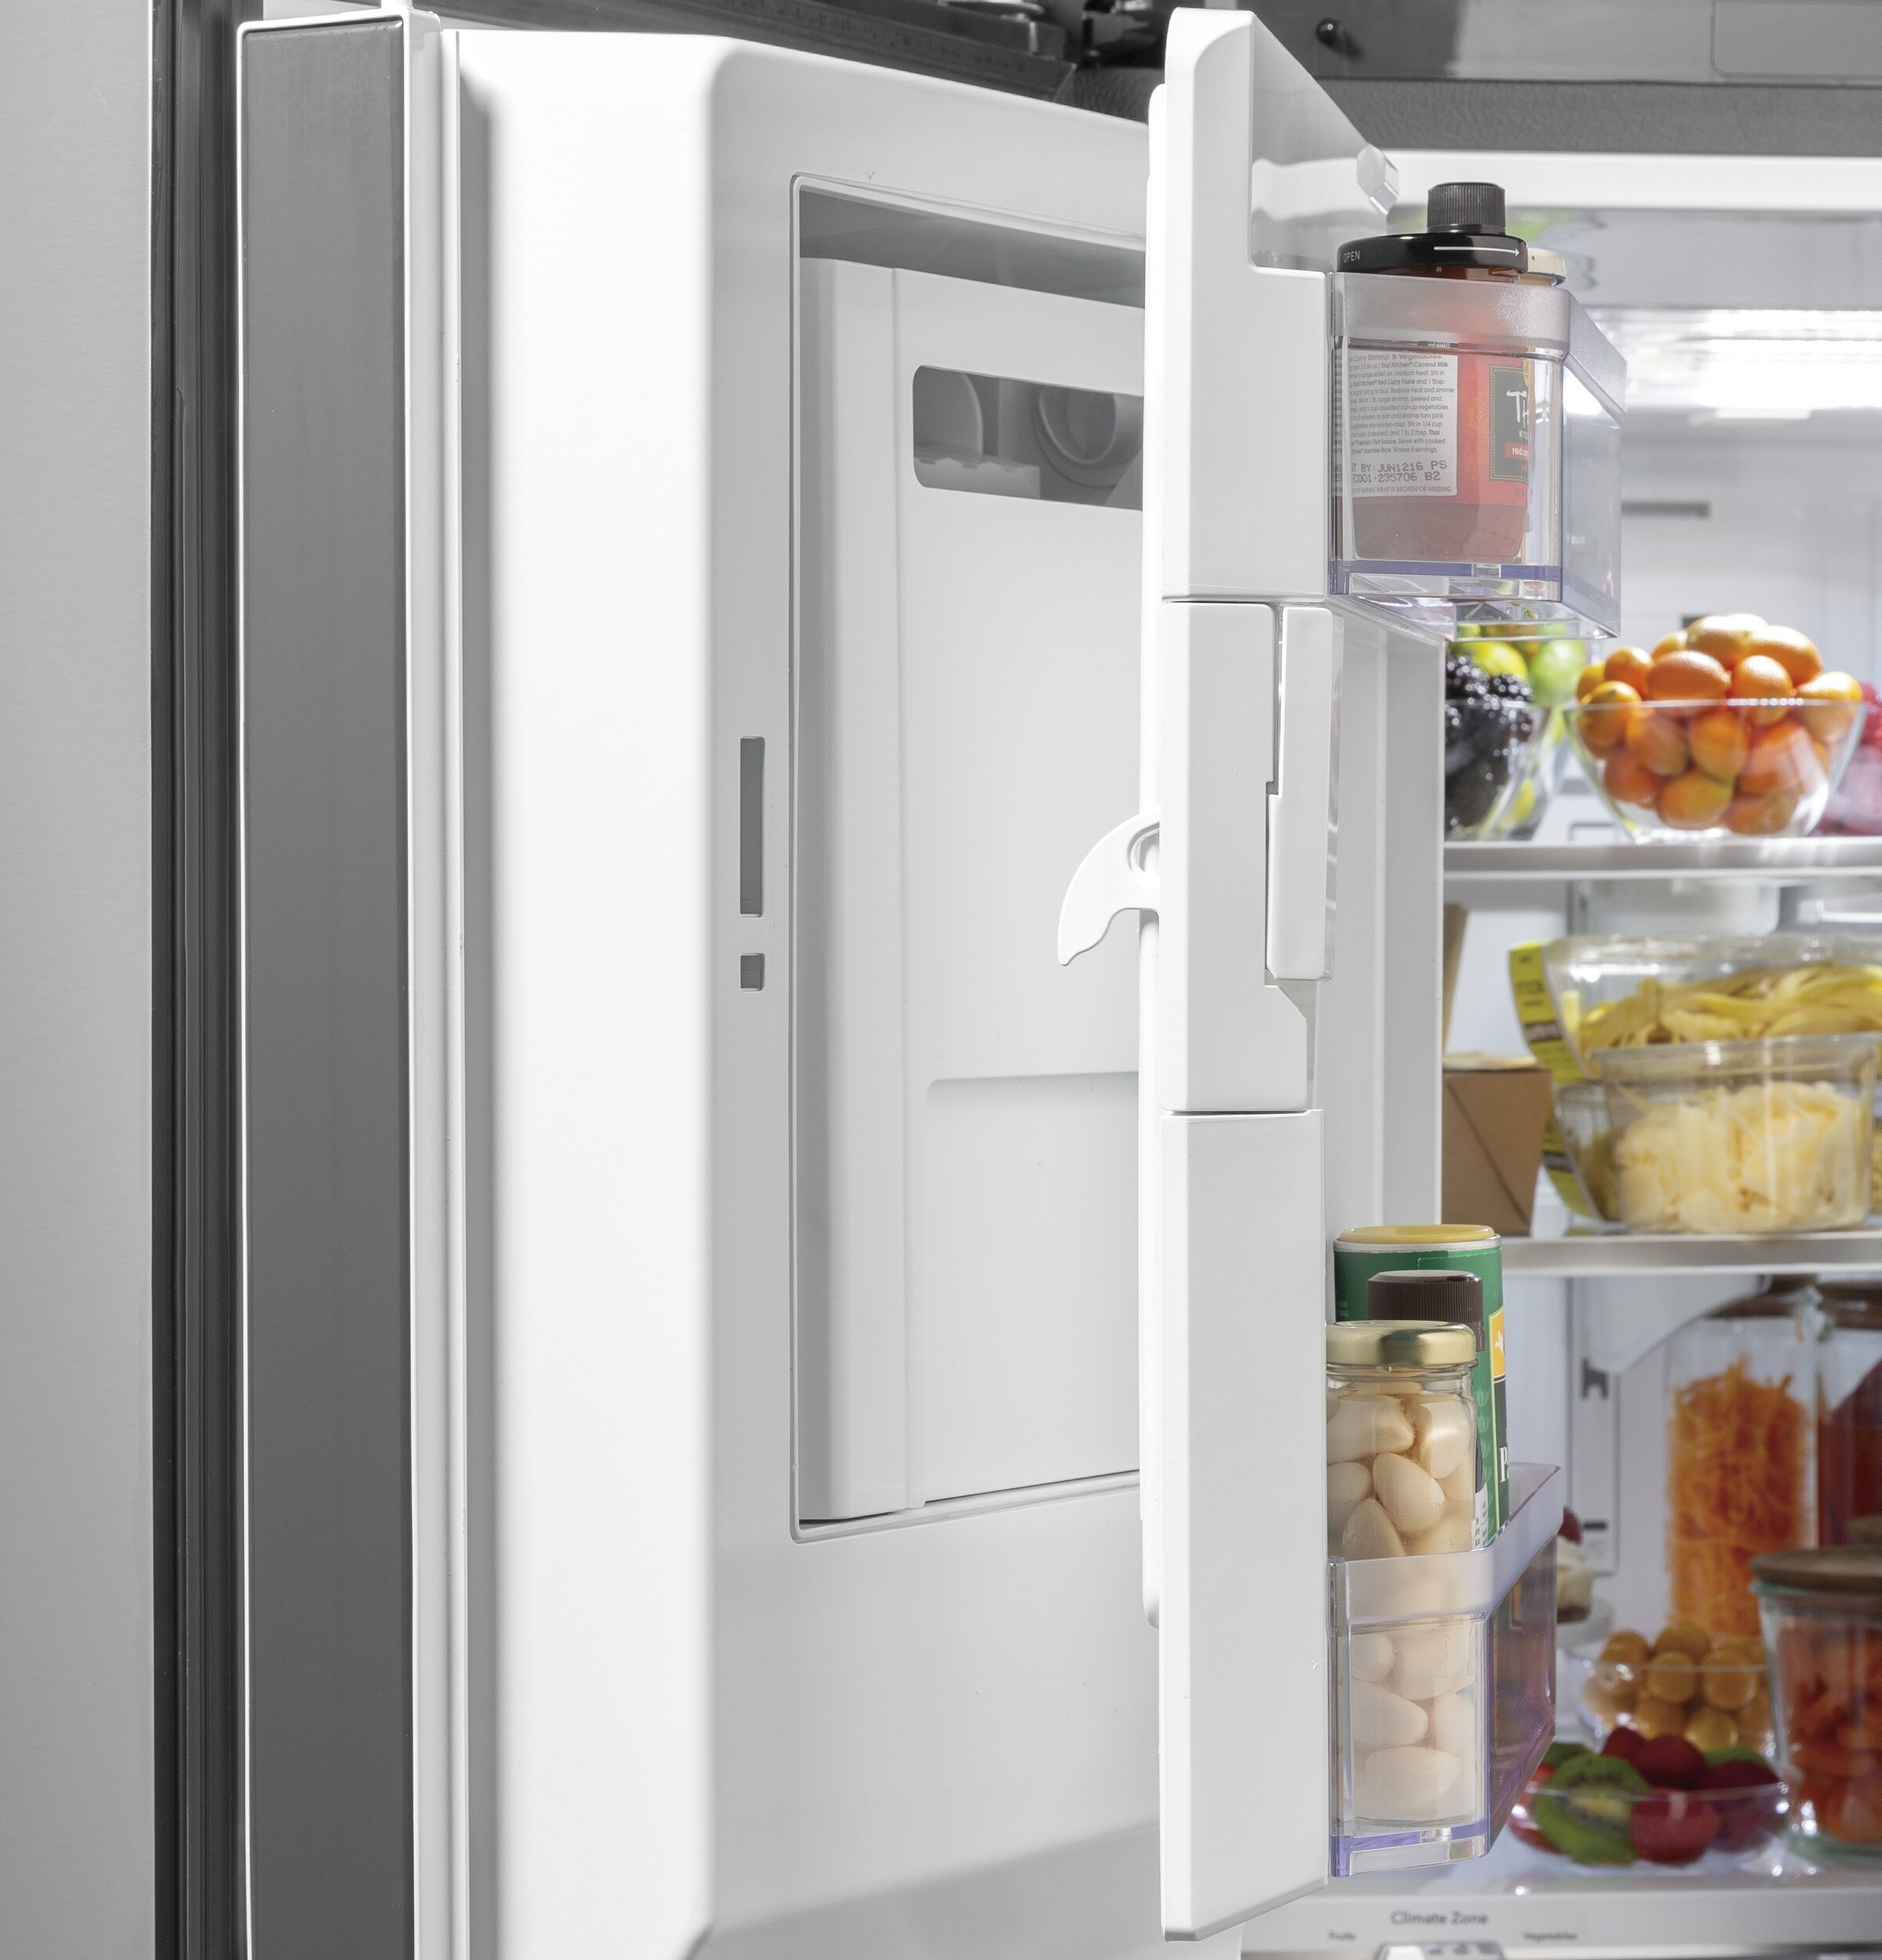 Cafe 25.6-cu ft French Door Refrigerator with Ice Maker, Water and 